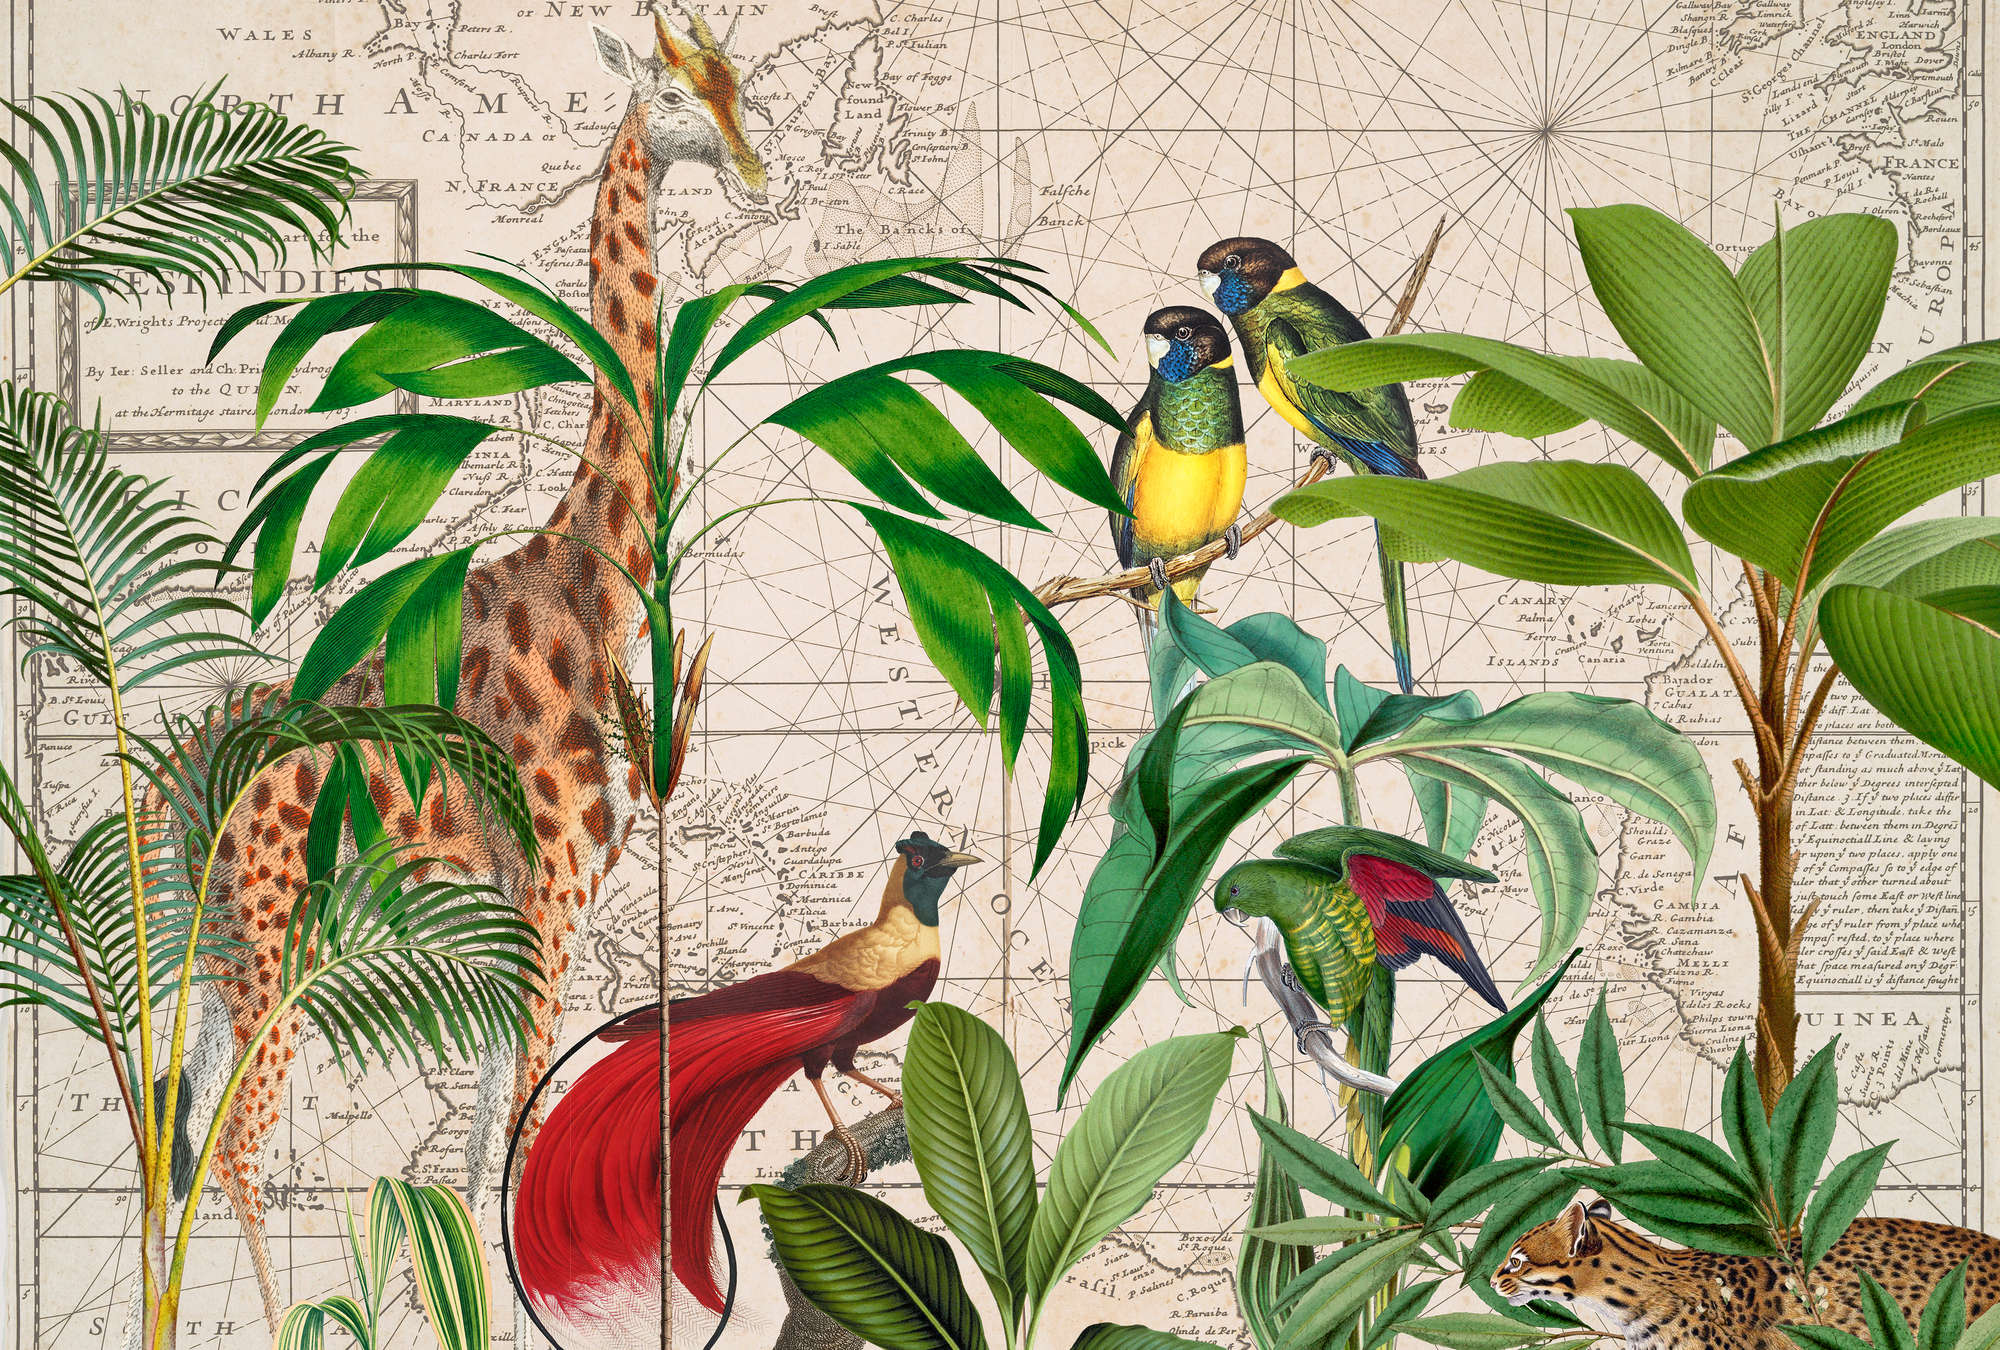             Wildlife mural birds & giraffes with retro map in collage style
        